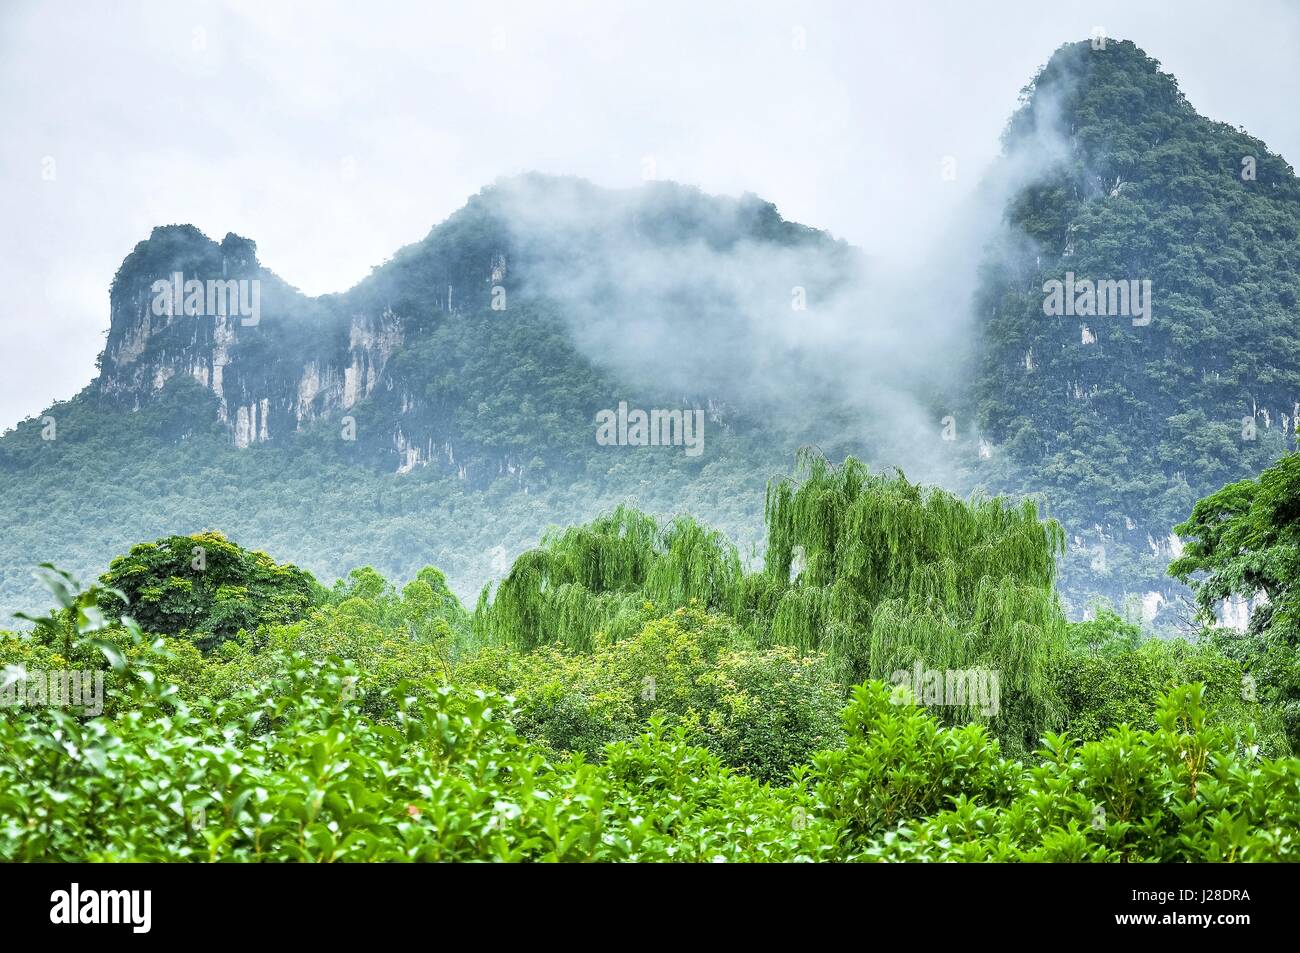 Mountains scenery in the mist Stock Photo